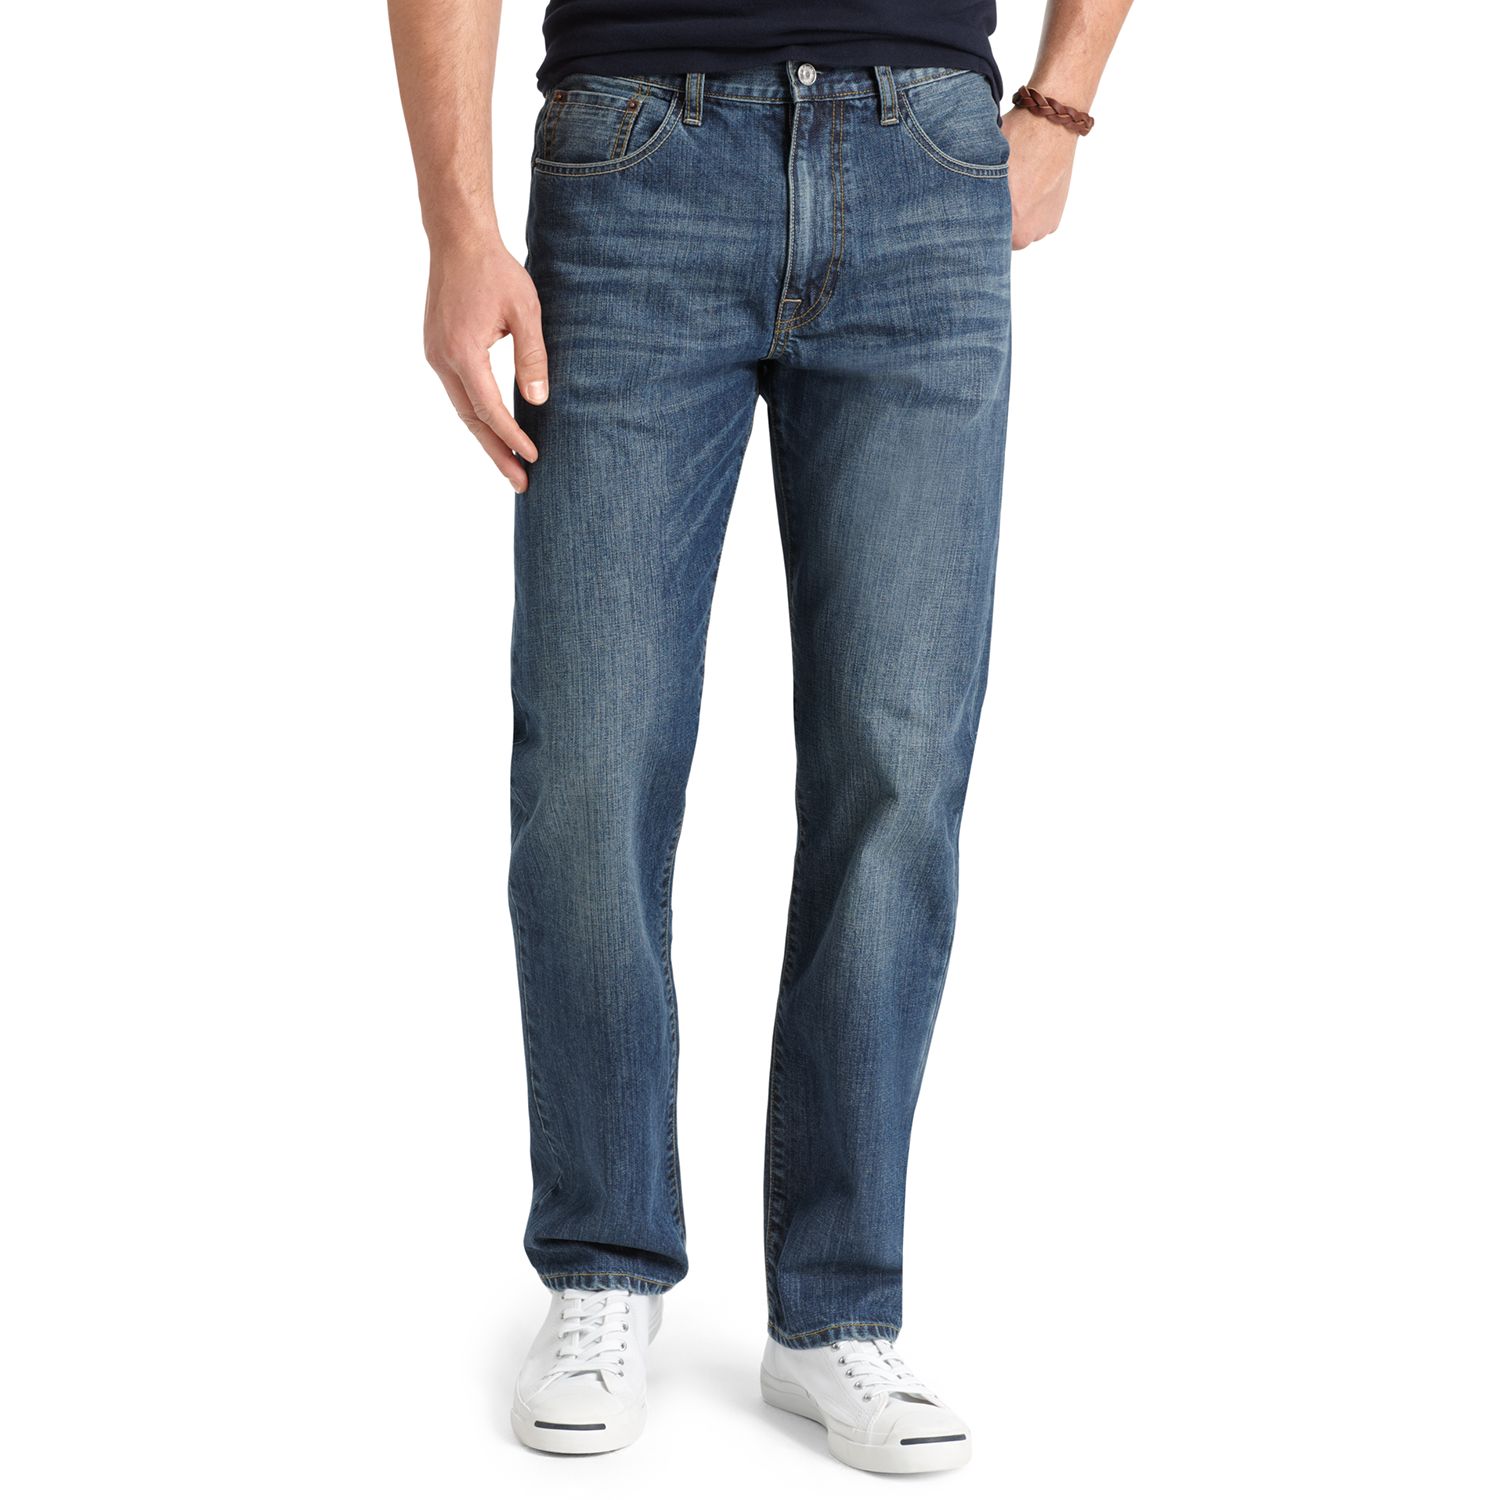 izod athletic fit jeans